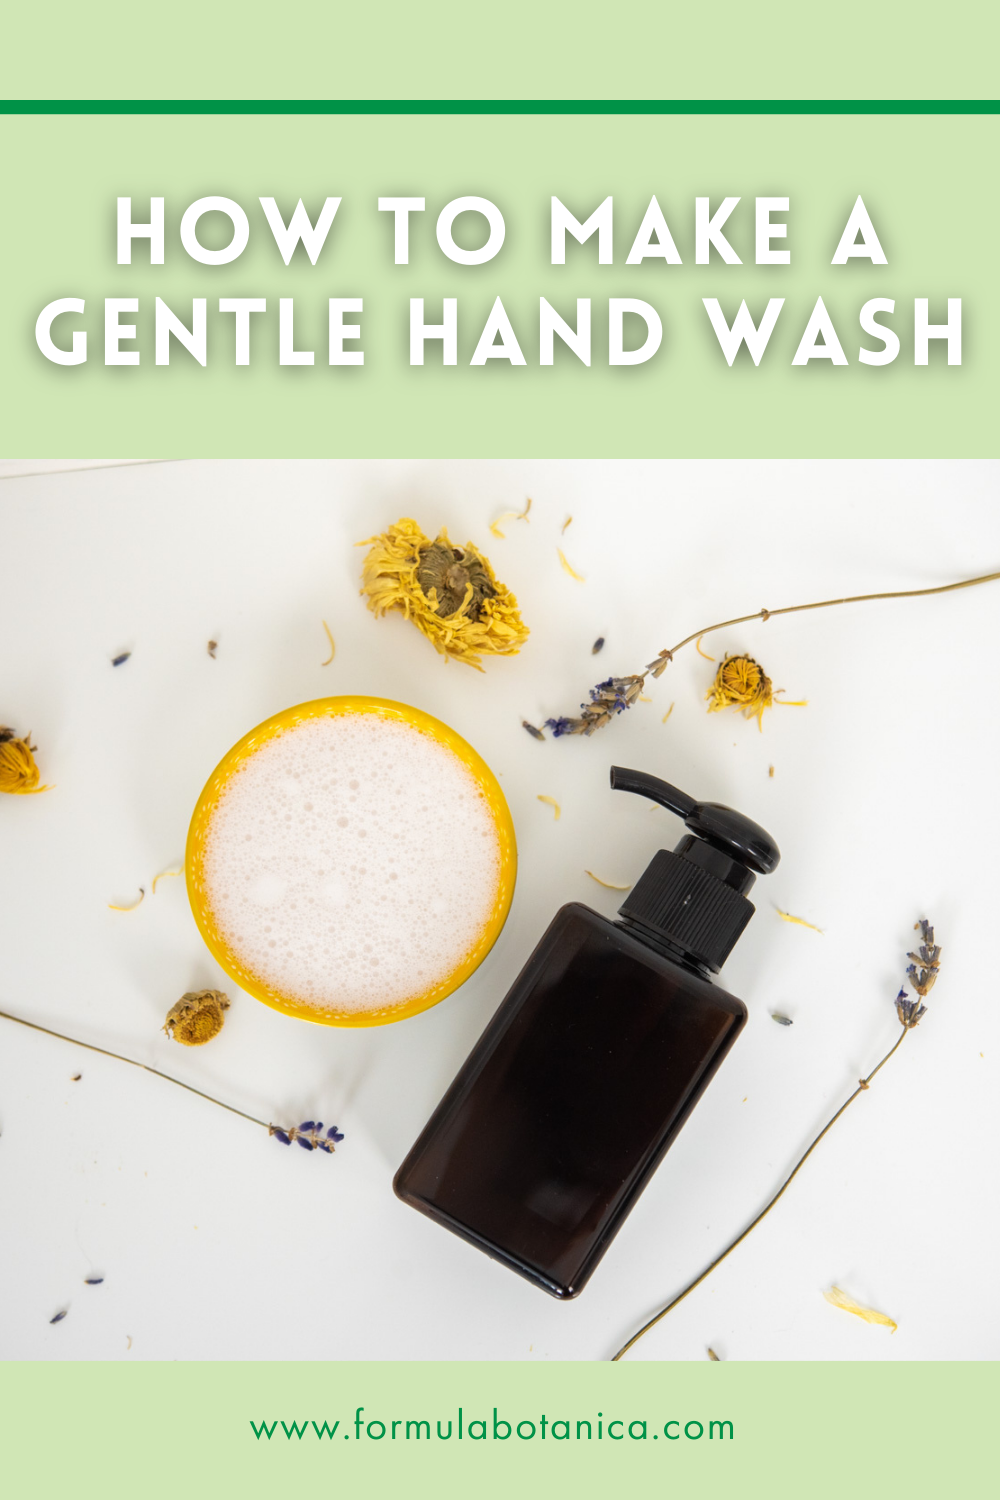 How to make a gentle hand wash